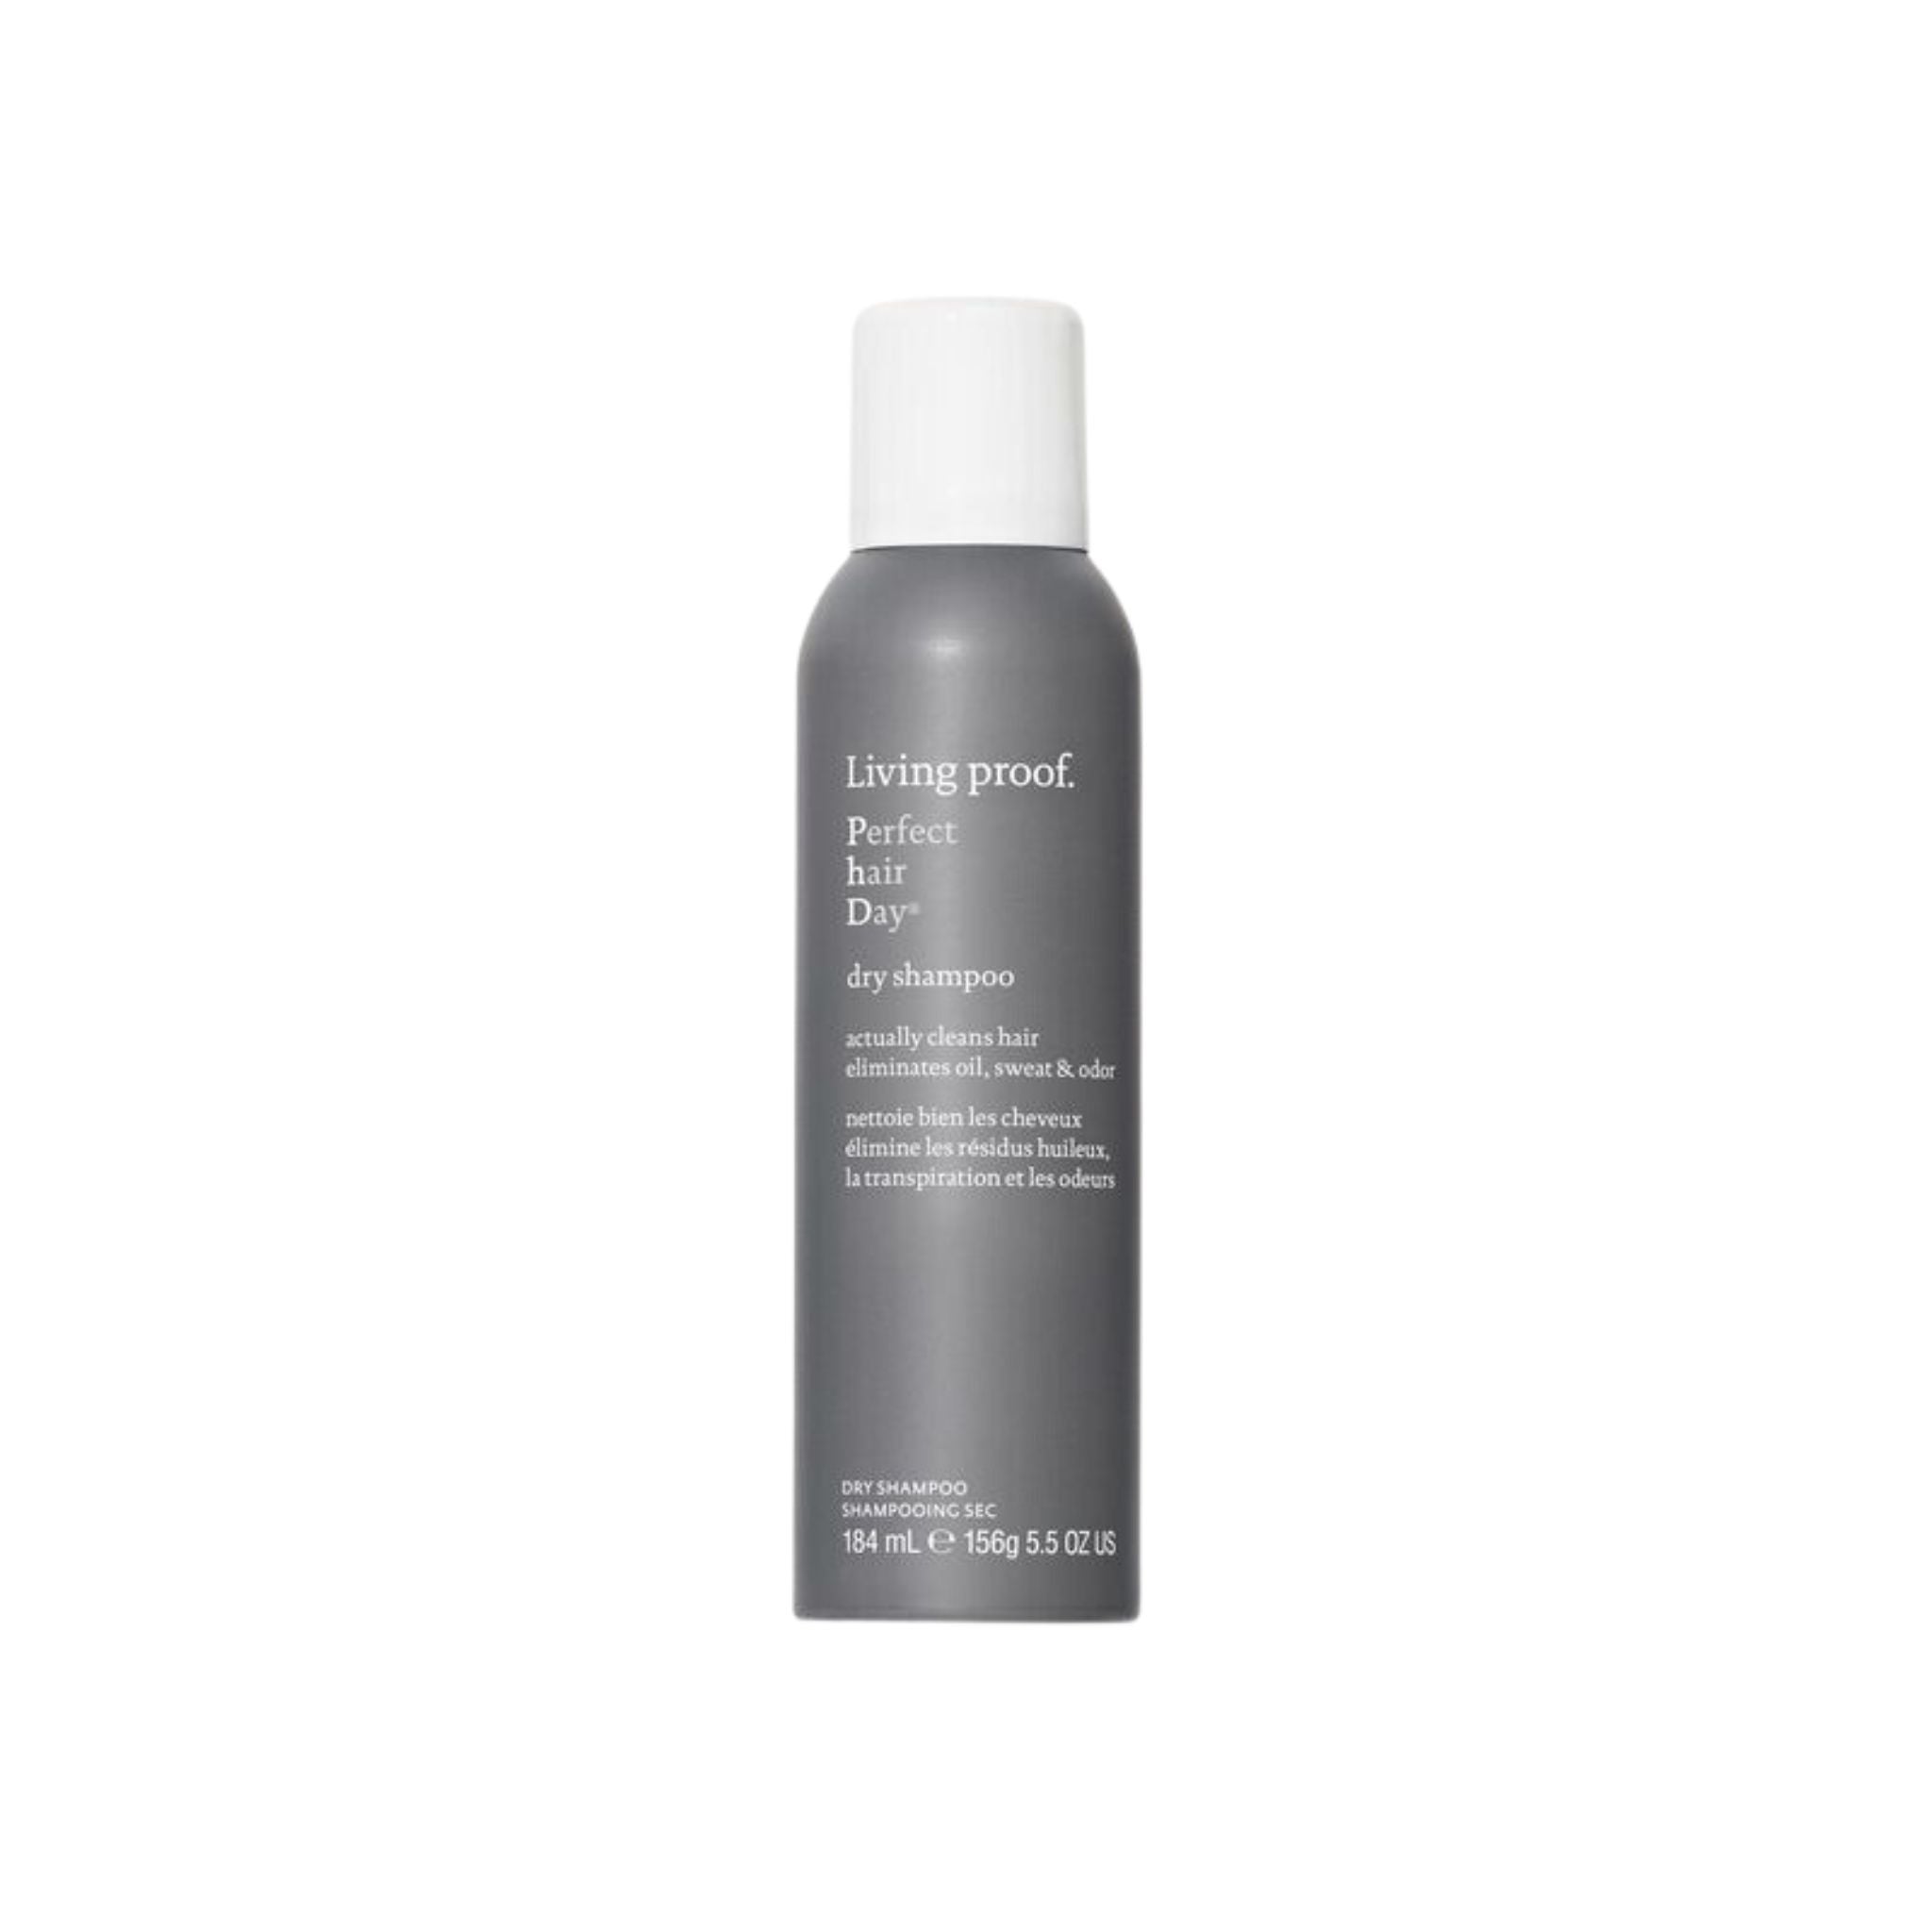 Living Proof - Perfect Hair Day Dry Shampoo 198ml